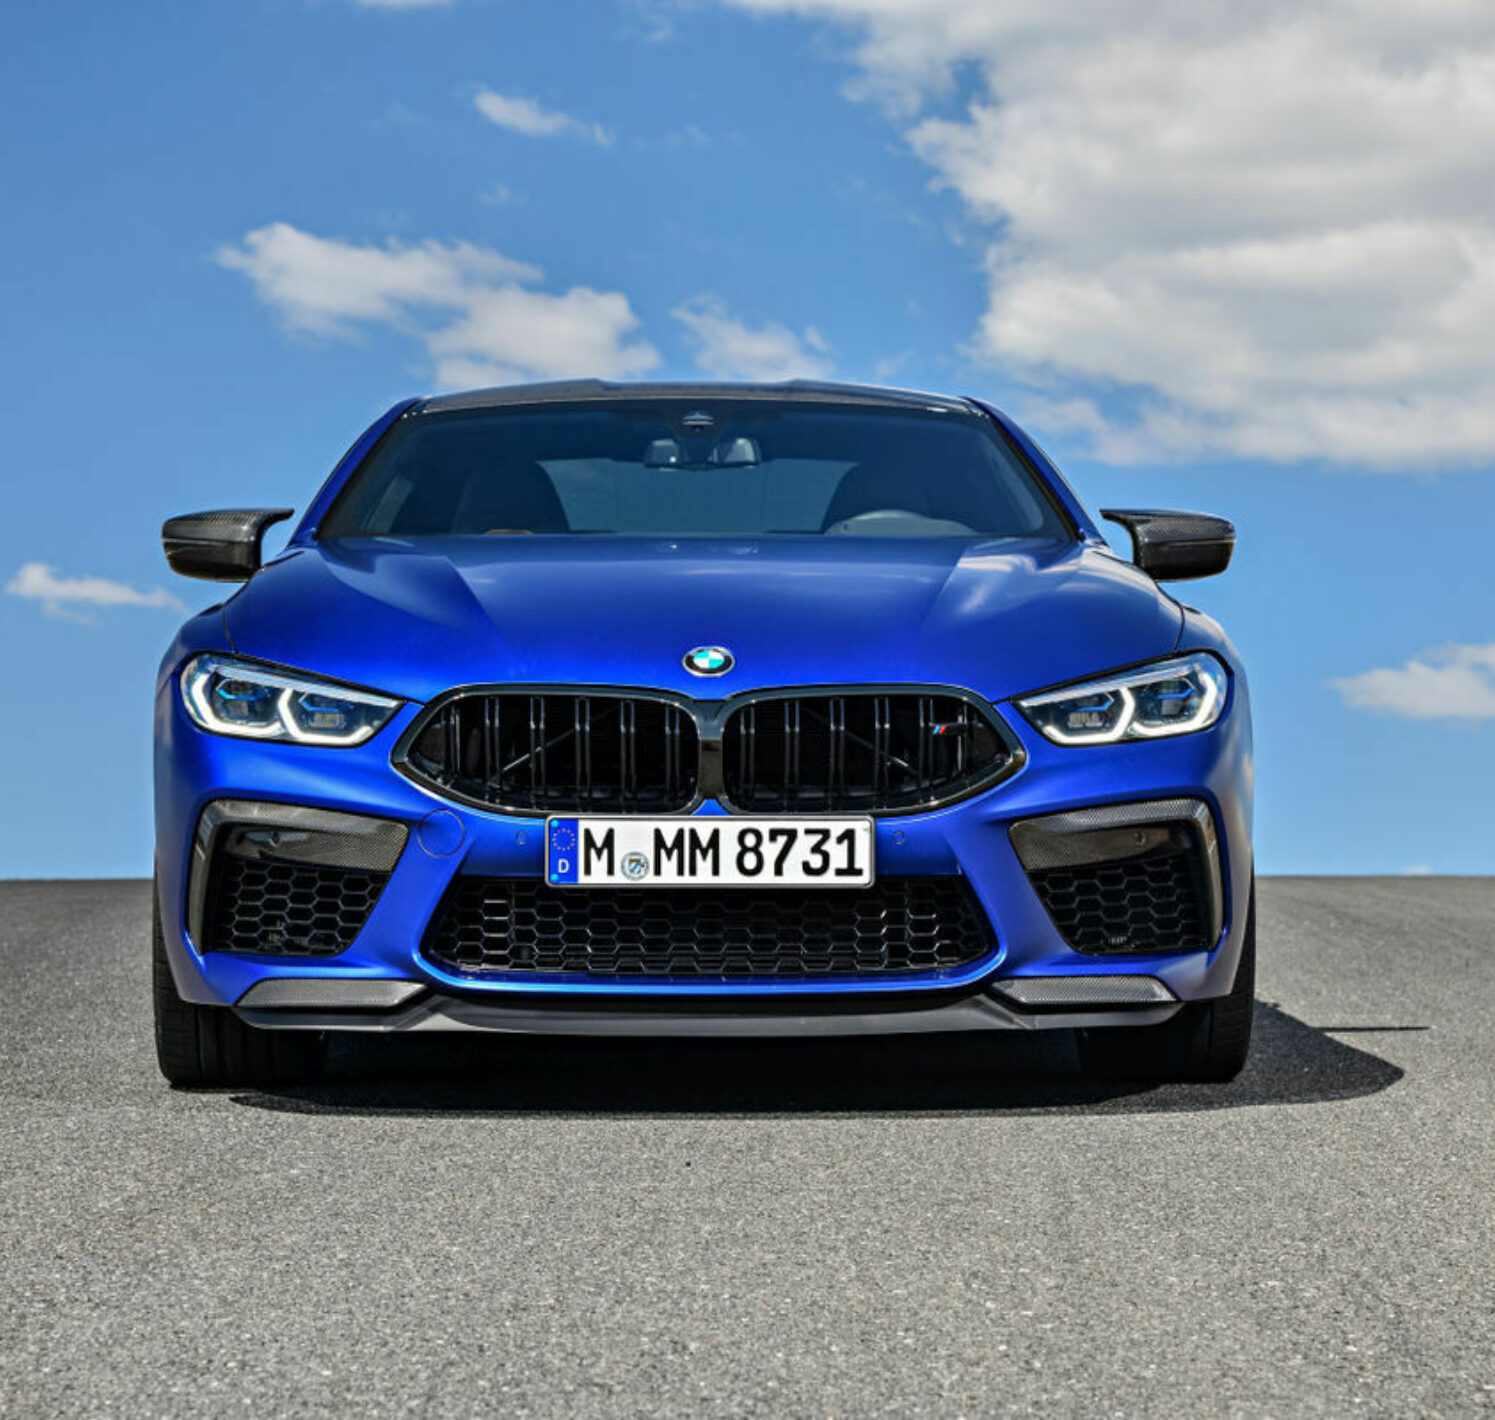 https://autofilter.sk/assets/images/rad-8-coupe/gallery/bmw-m8-coupe-galeria.jpg - obrazok